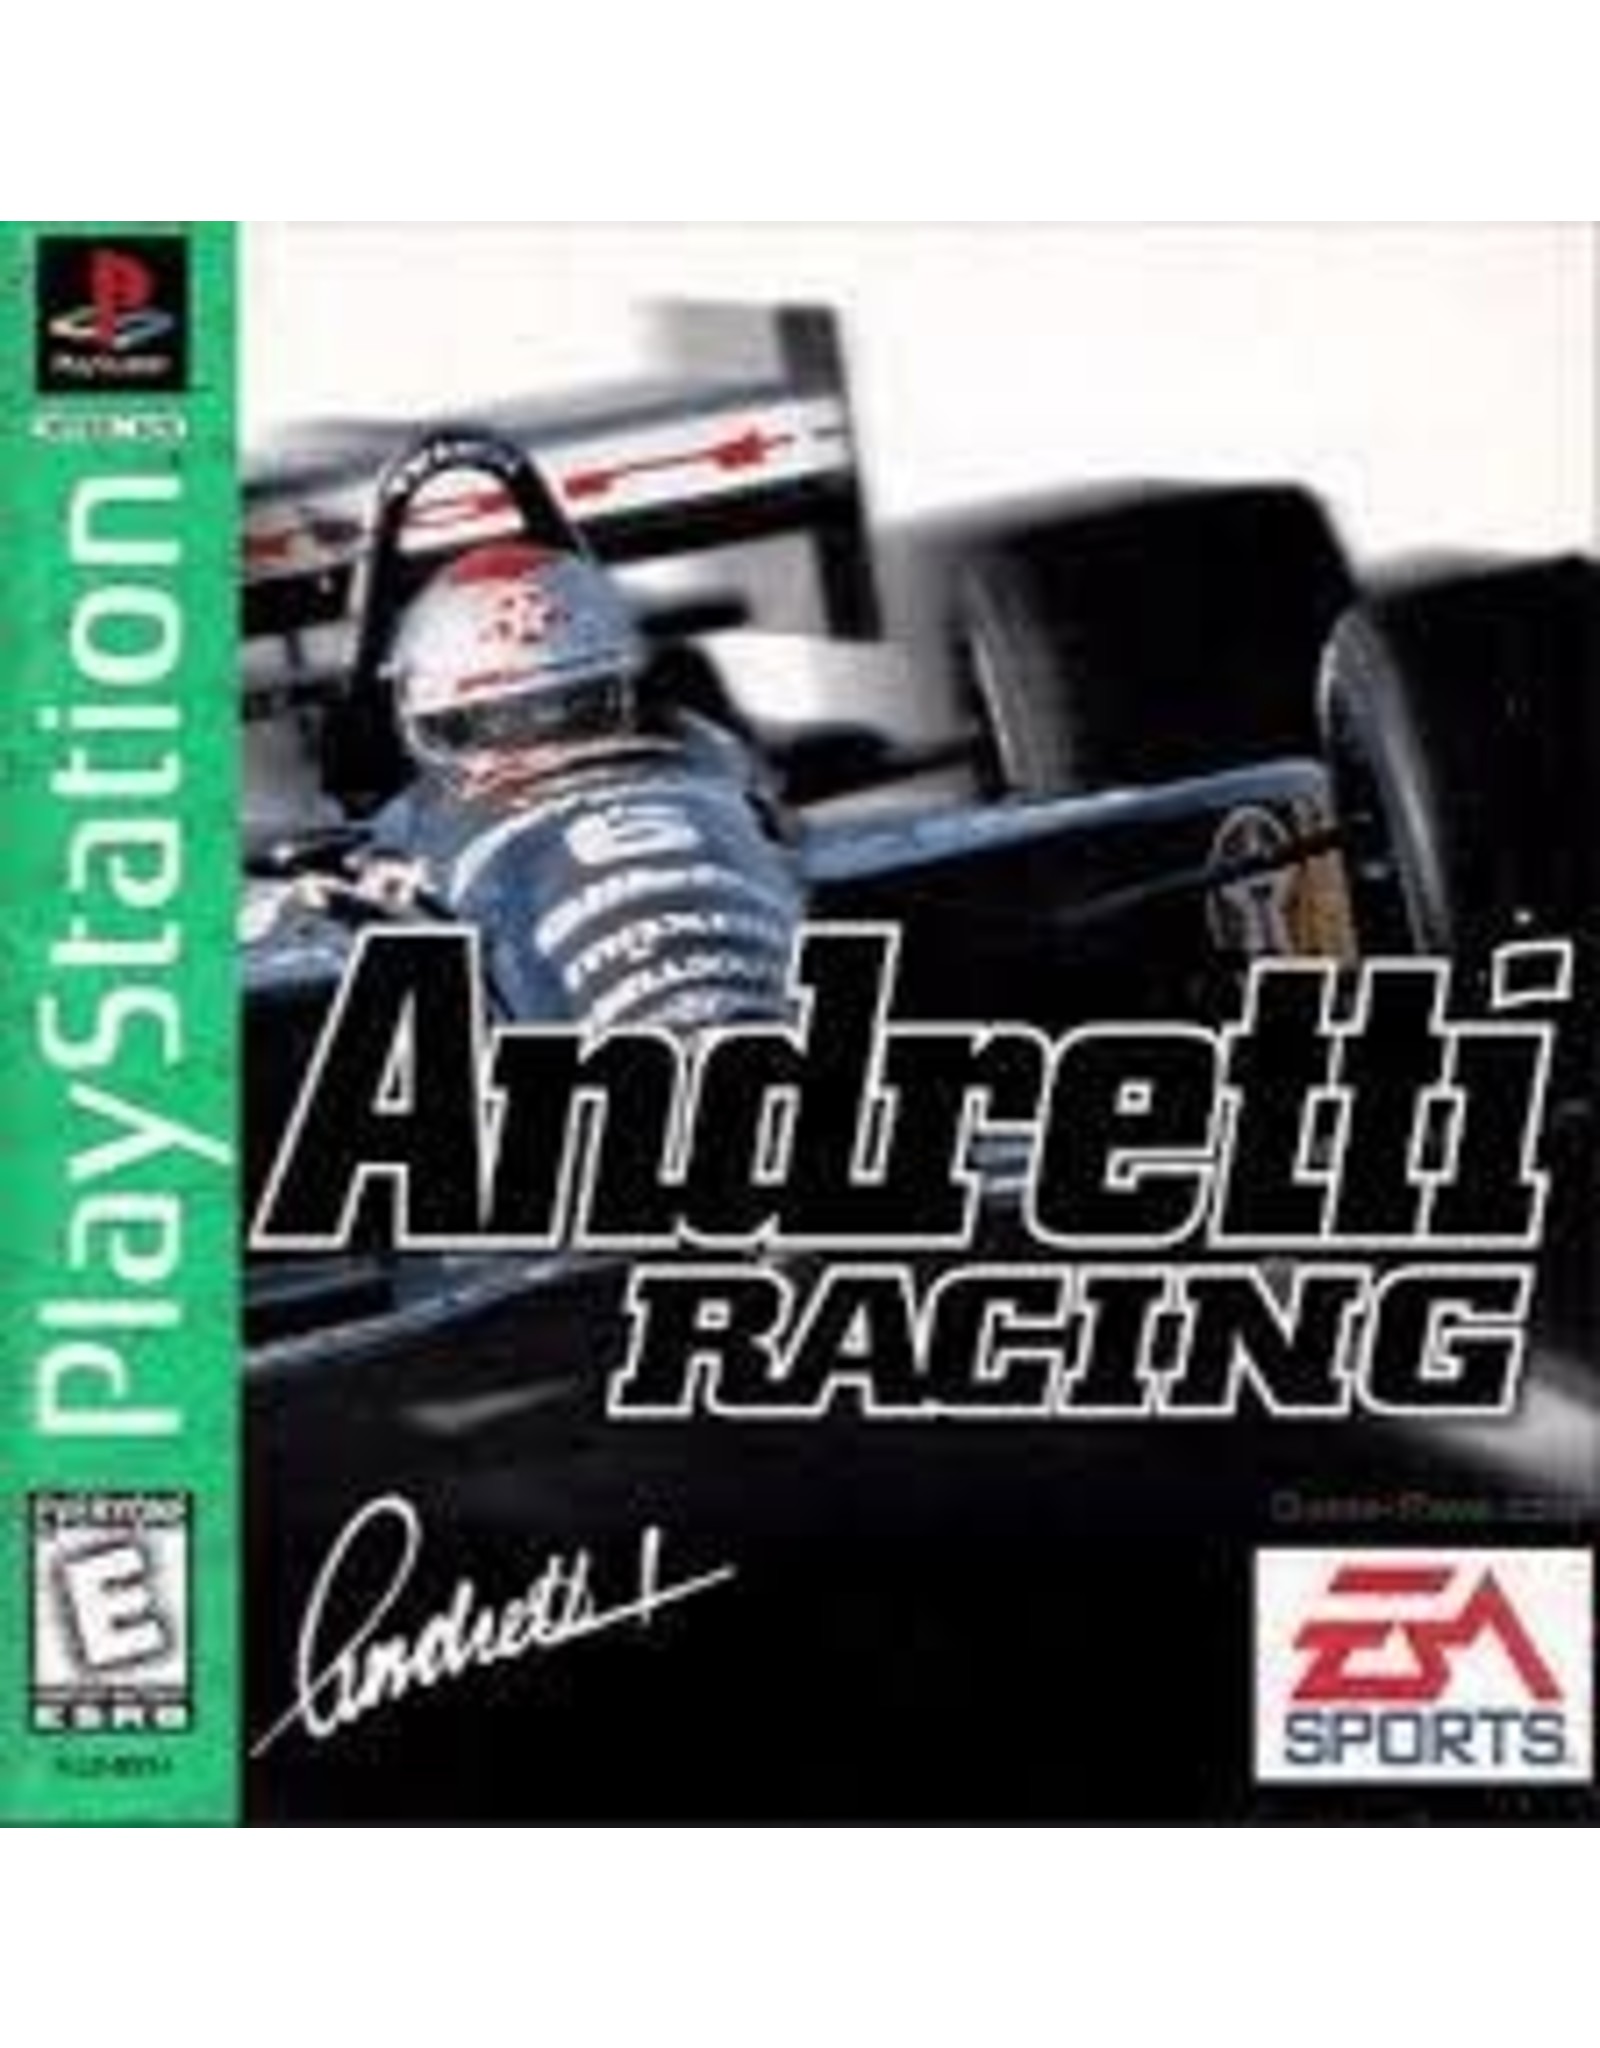 Playstation Andretti Racing (Greatest Hits, Sticker on Manual, Writing on discCiB)